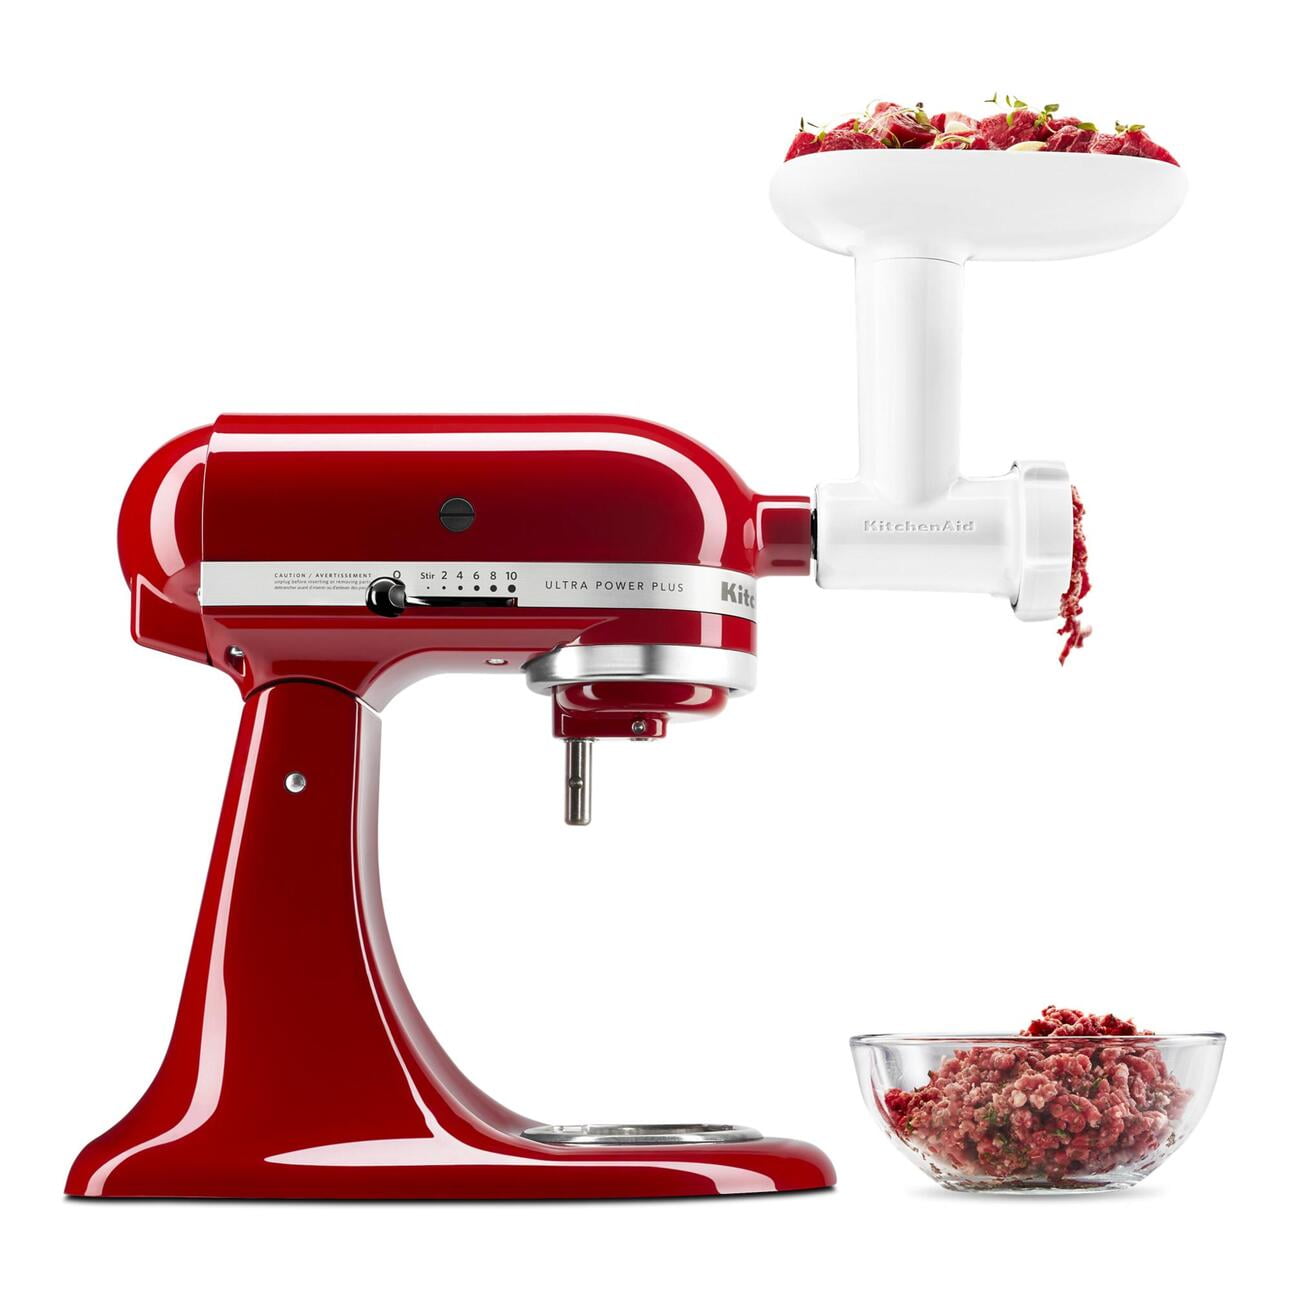 Suitable for Cutting Cheese Meat White Meat Roller Including 3 Grinding Plates Meat Grinder Attachment Veg Meat Grinder for Kitchenaid Stand Mixers Sausage Stuffer and Cleaning Brush 